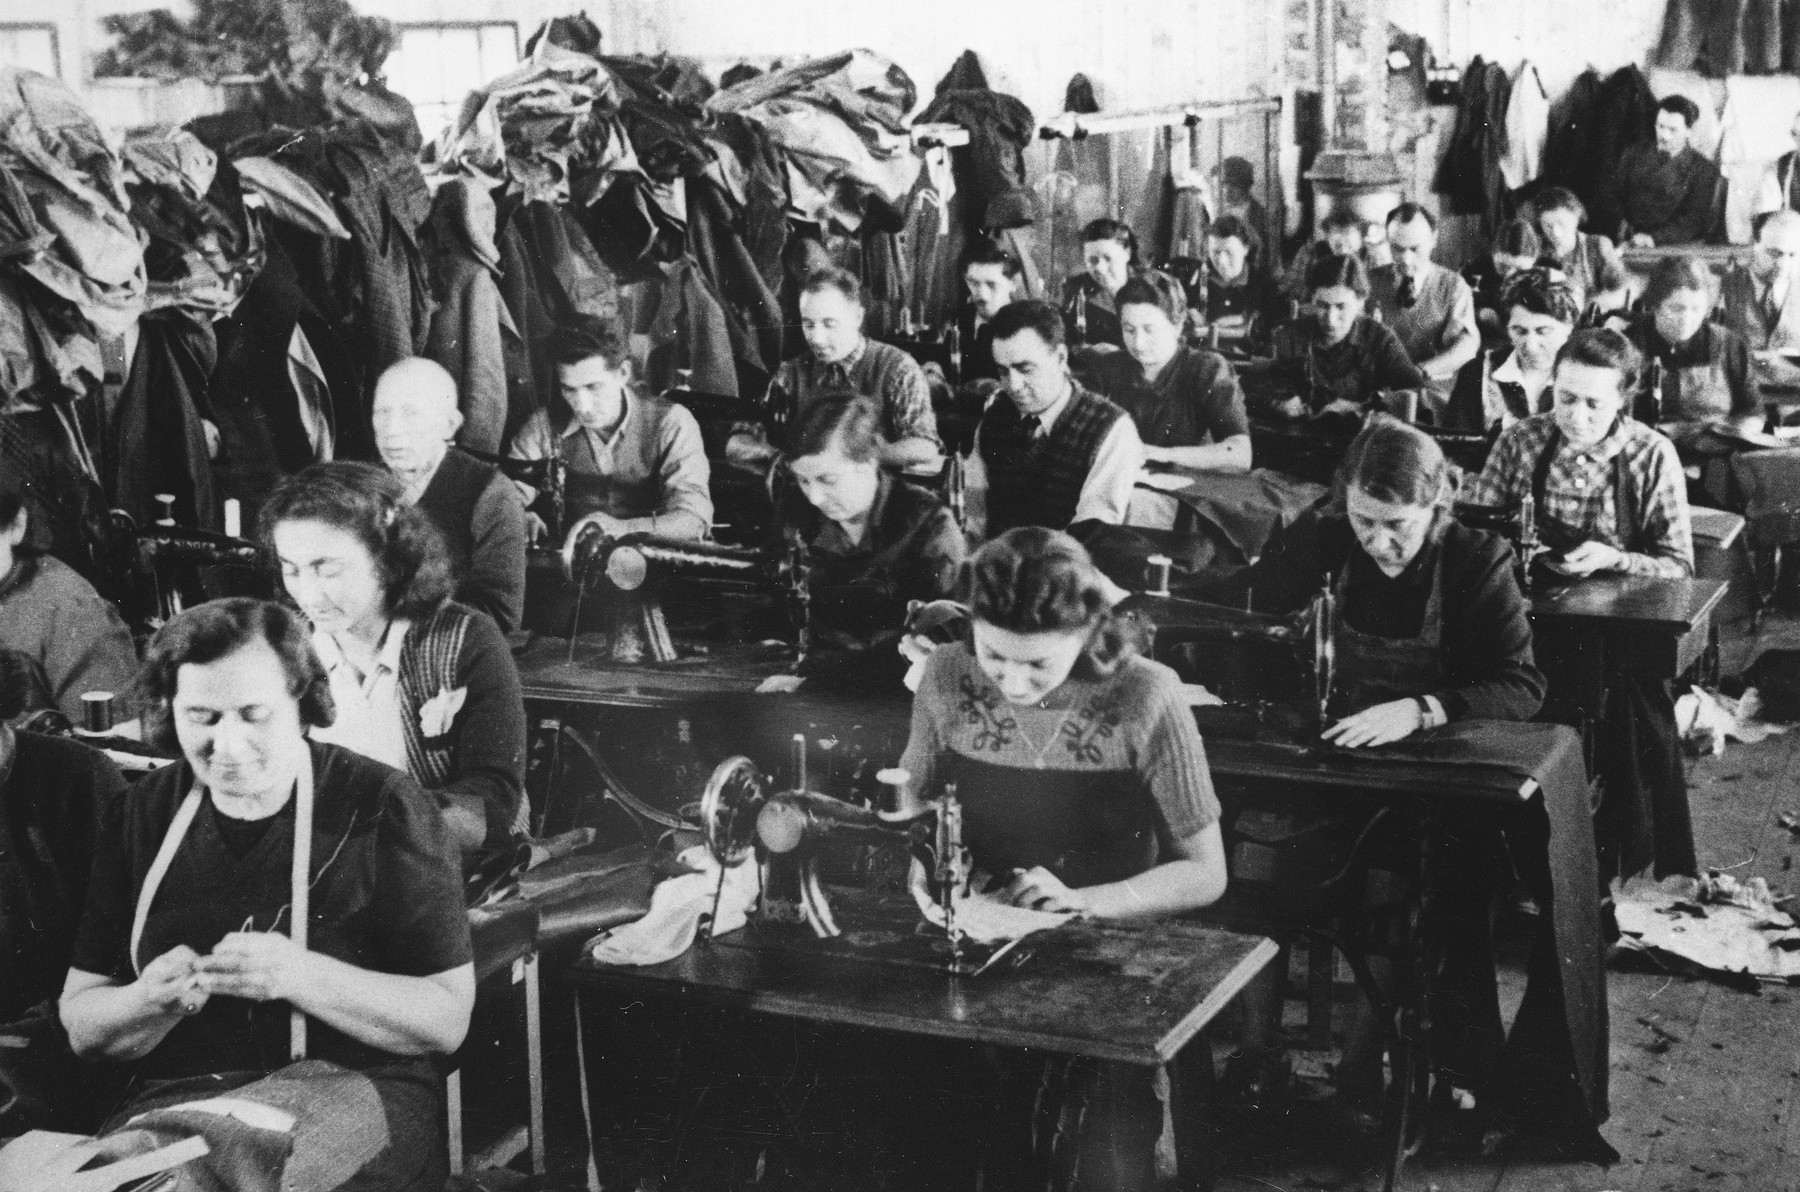 Prisoners operate sewing machines at a Slovak labor camp.